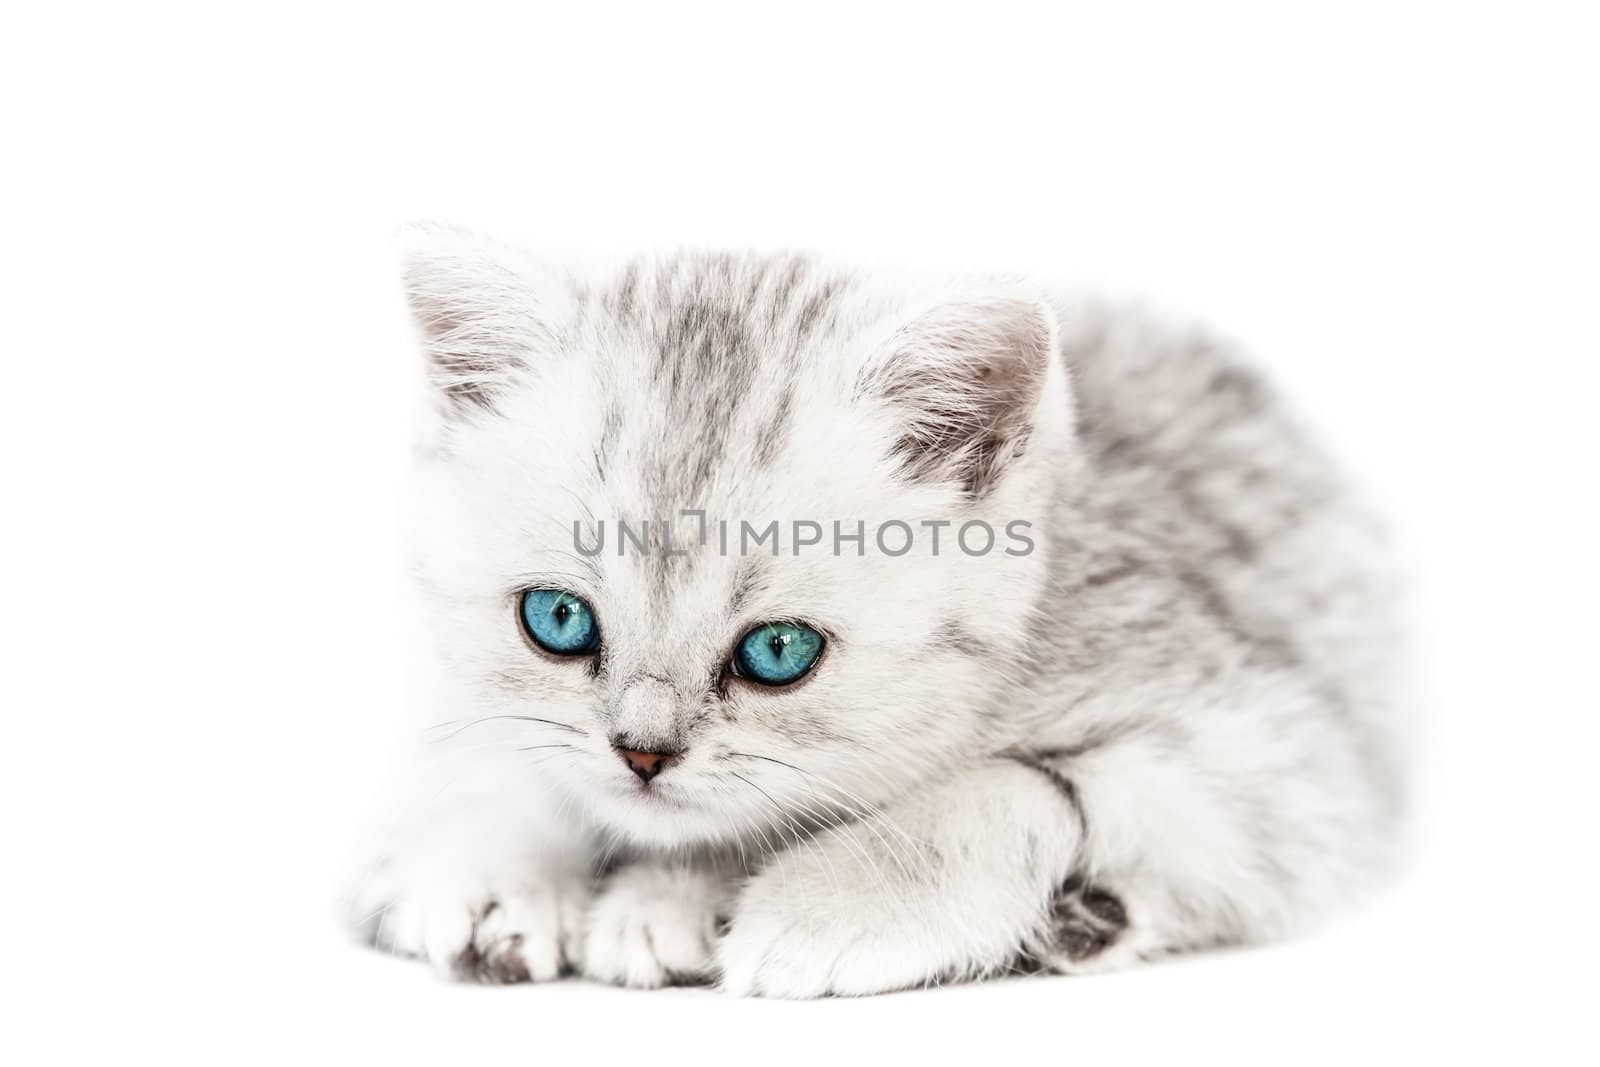 Feline animal pet little british domestic silver tabby cat with blue looking eyes